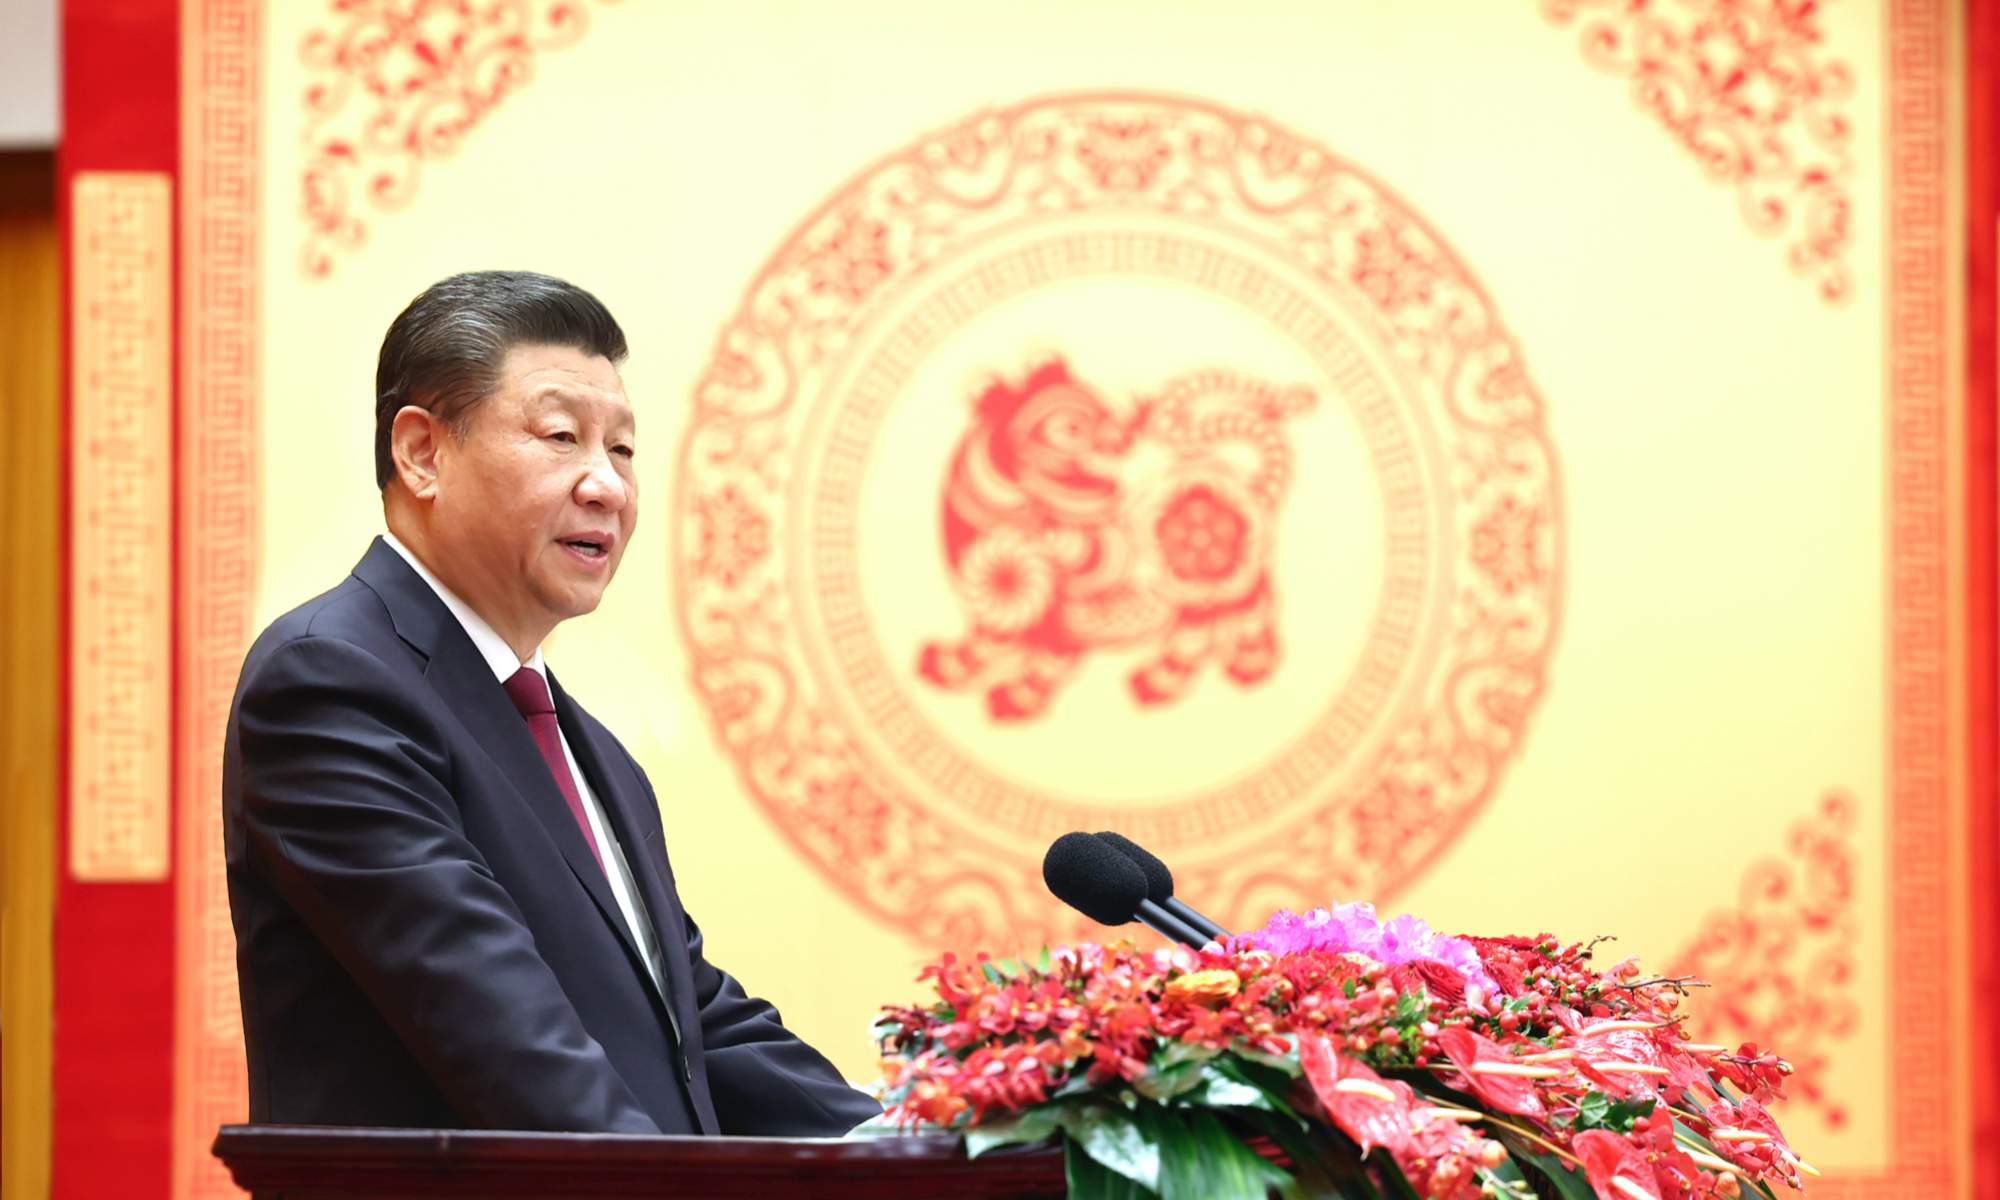 Chinese President Xi Jinping, also general secretary of the Communist Party of China (CPC) Central Committee and chairman of the Central Military Commission, addresses a Chinese Lunar New Year reception at the Great Hall of the People in Beijing, capital of China, Jan. 30, 2022. The CPC Central Committee and the State Council held the reception on Sunday in Beijing. (Xinhua/Ju Peng)